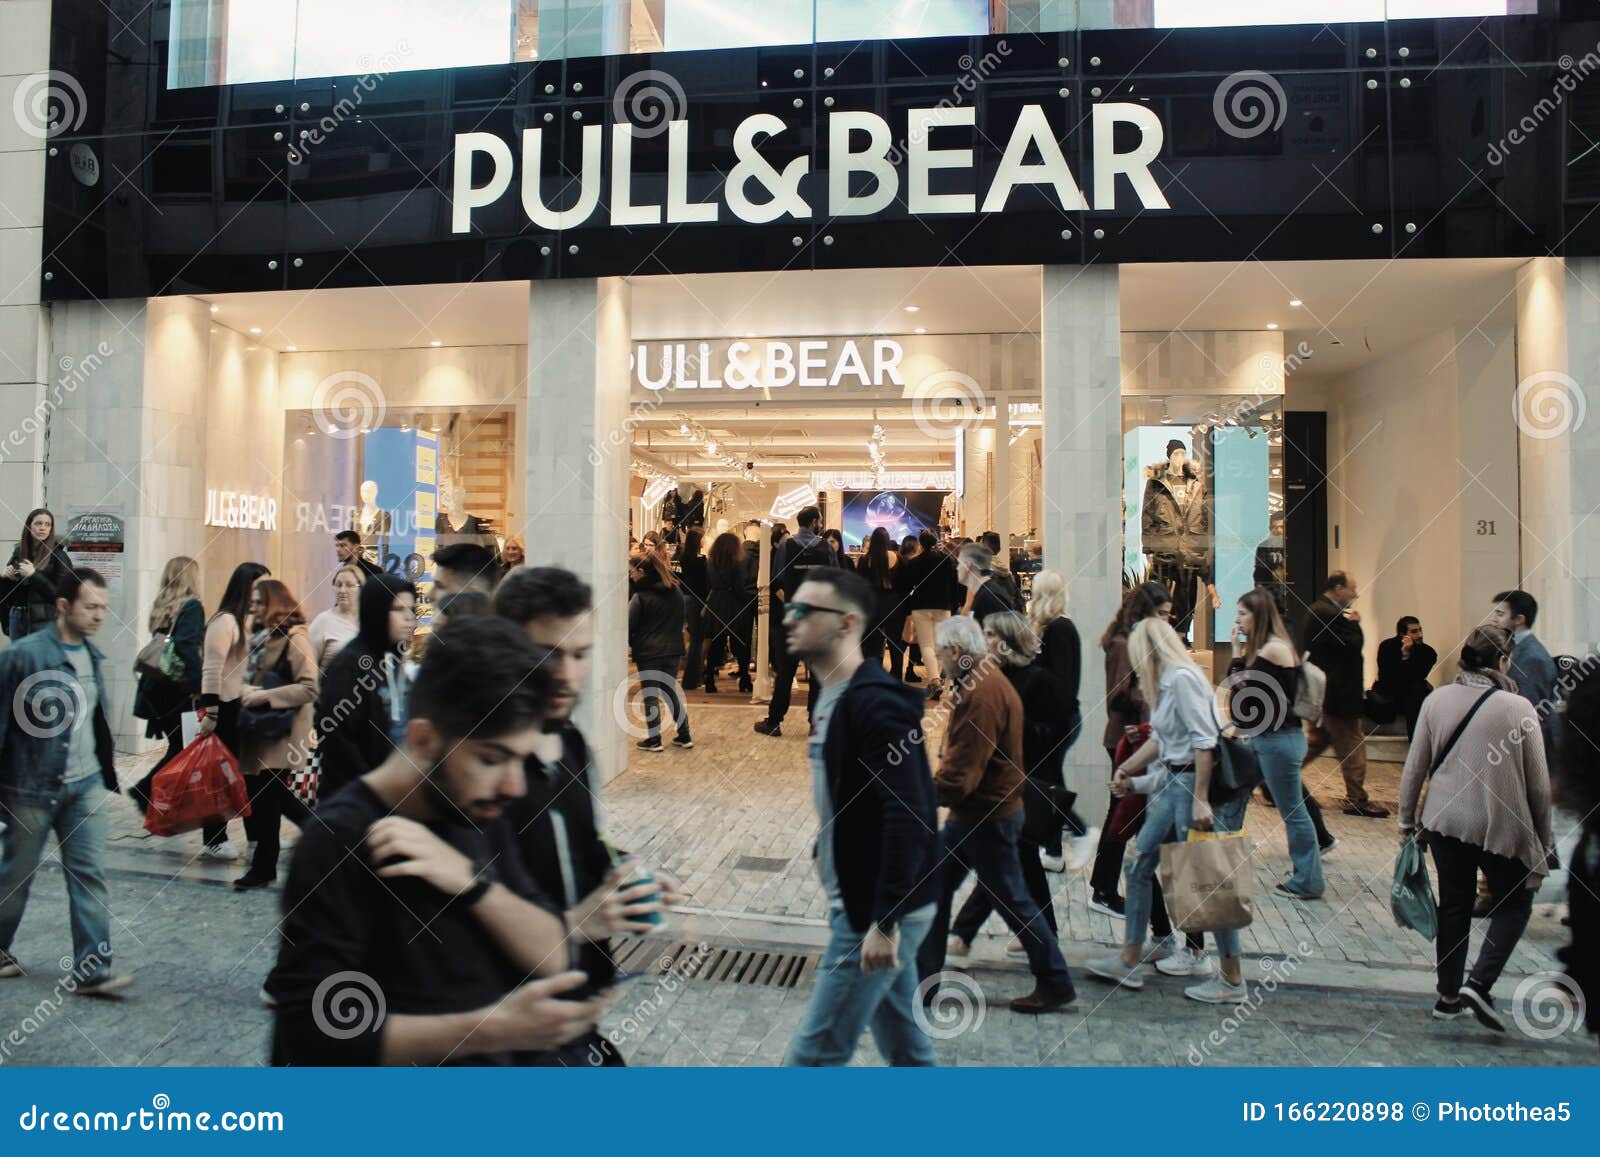 Pull and Bear Store Athens, Greece Editorial Stock Photo - Image of friday, city: